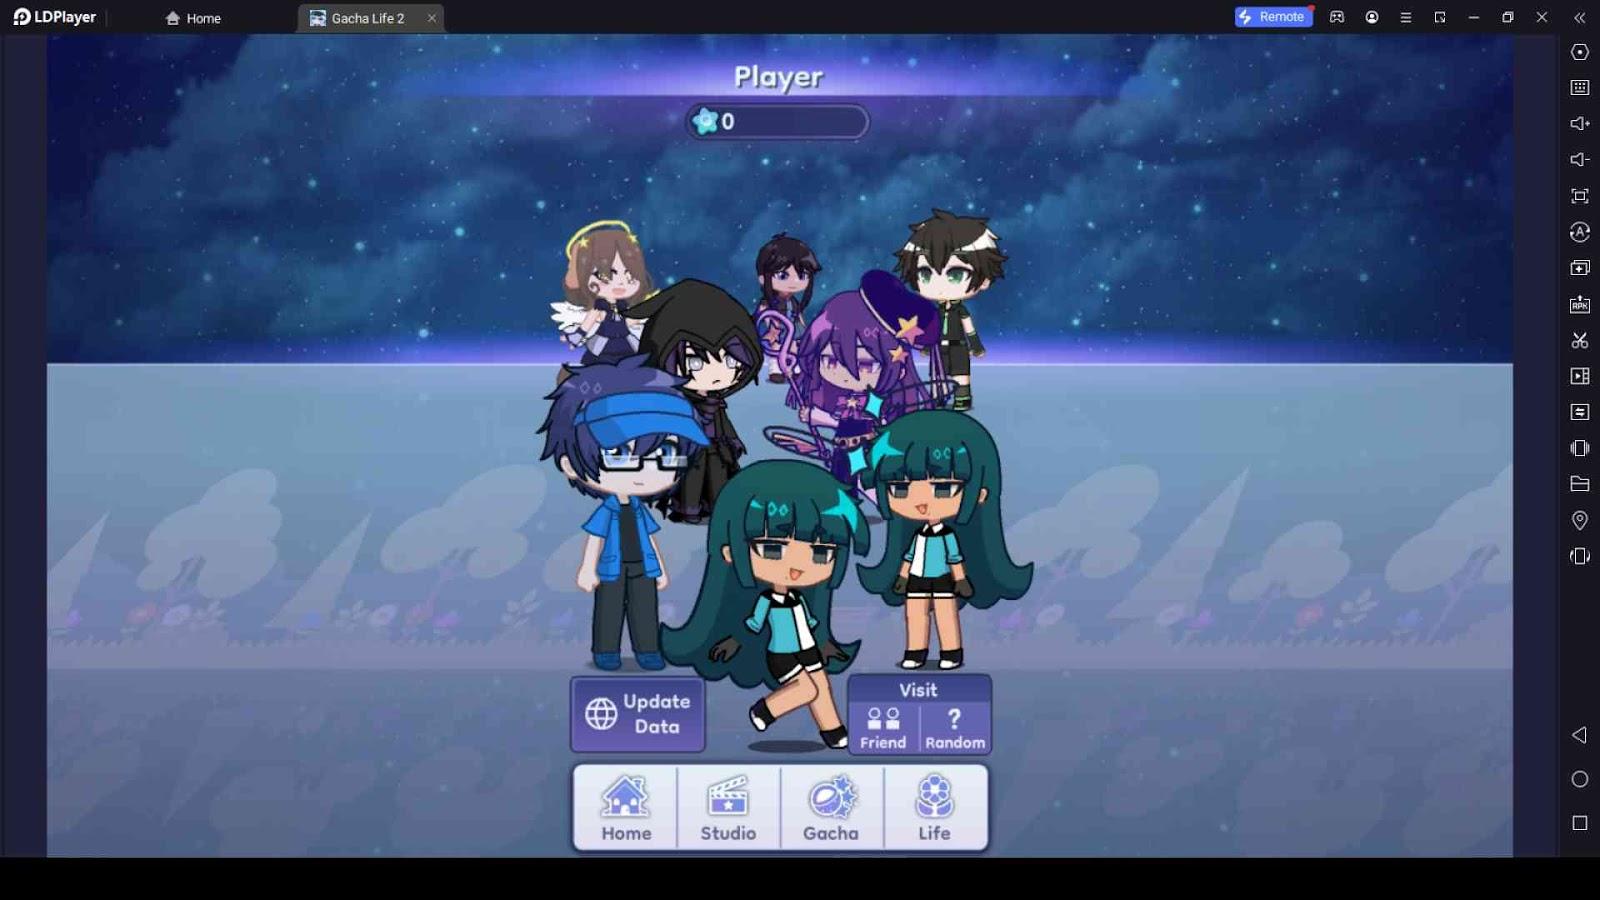 Gacha Life 2 Brings Almost 2 Much Fun To It's Sequel - Droid Gamers